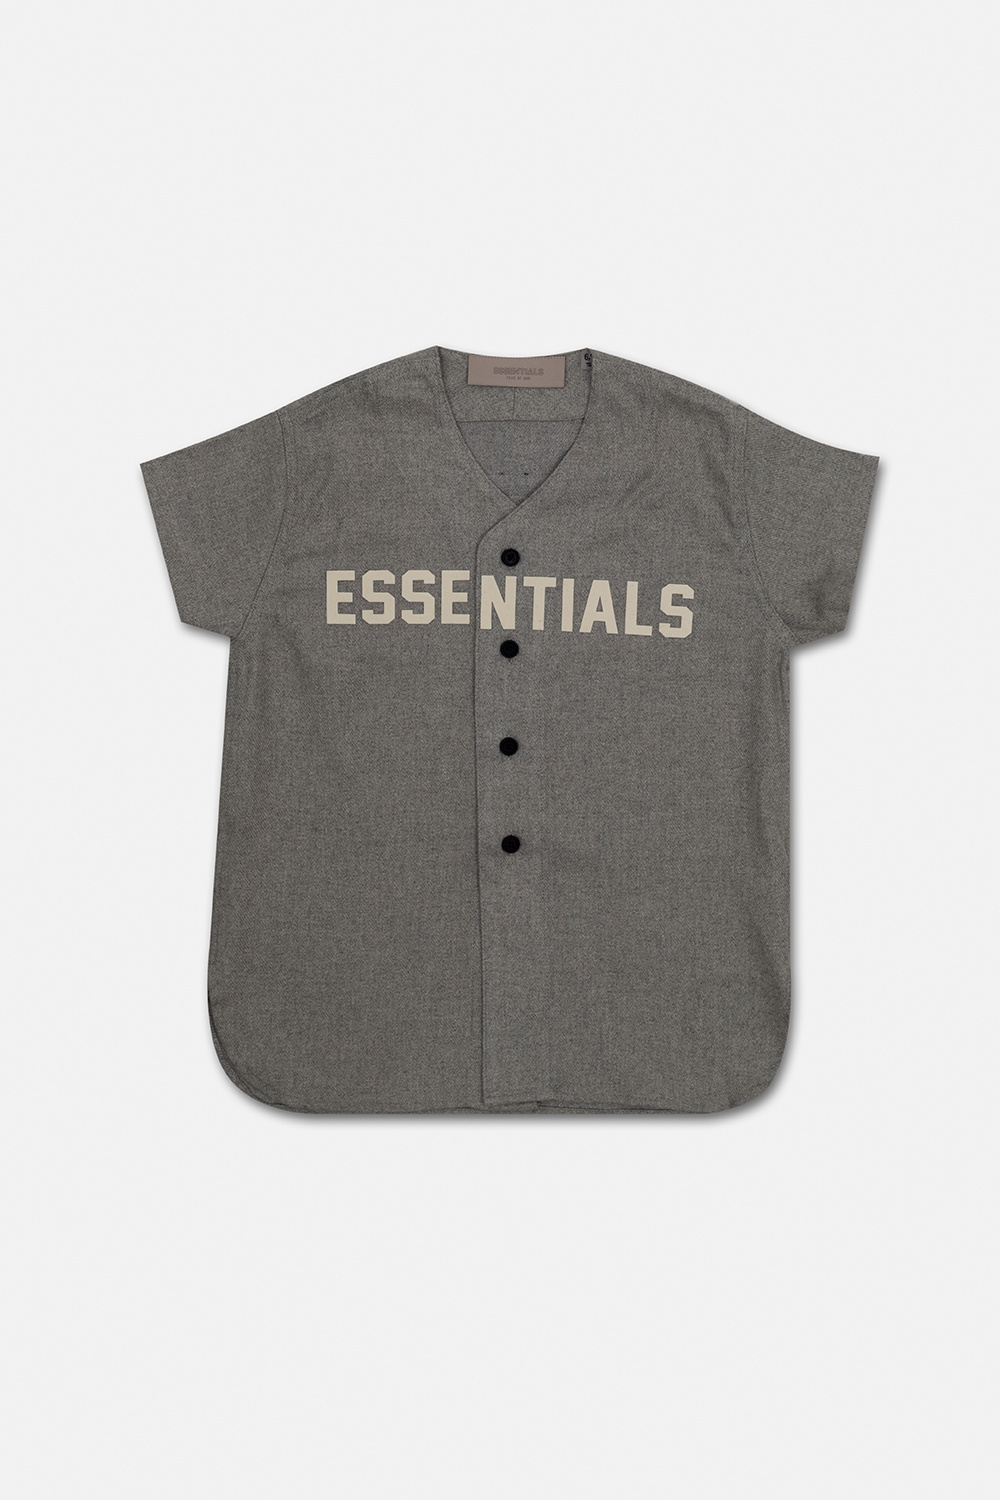 Fear Of God Essentials Kids Taxes and duties included